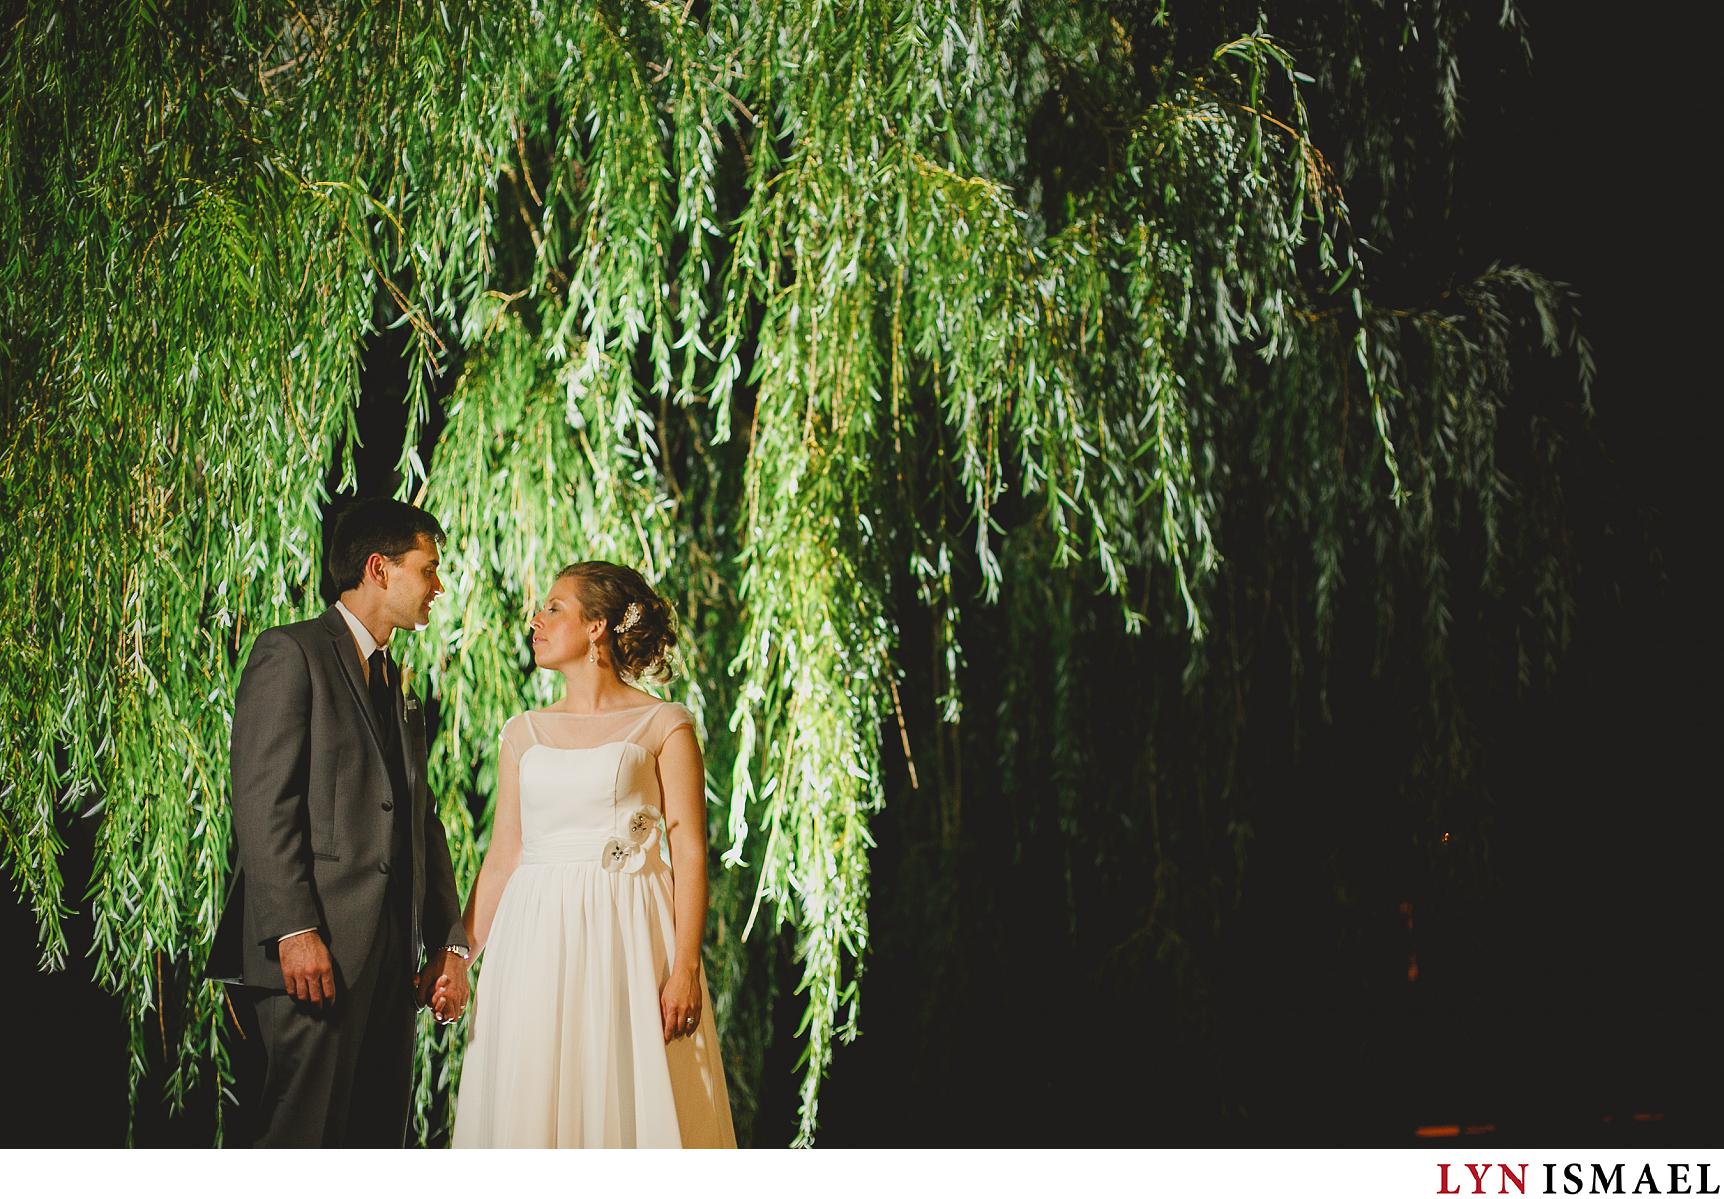 Night portrait of a newly wed bride and groom under a willow tree in Stoney Creek, Ontario.